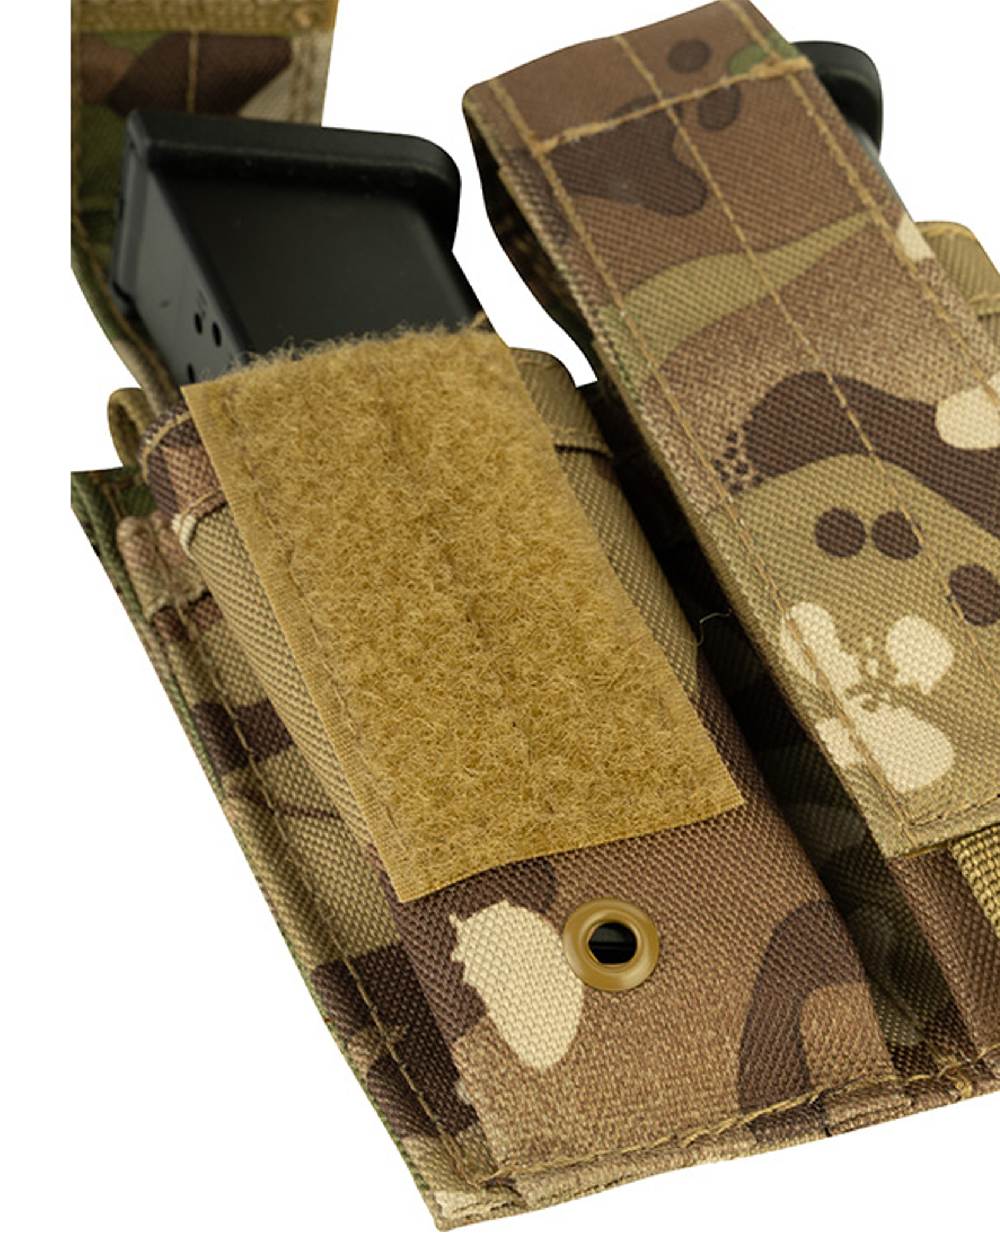 Viper Modular Double Pistol Mag Pouch in VCAM 